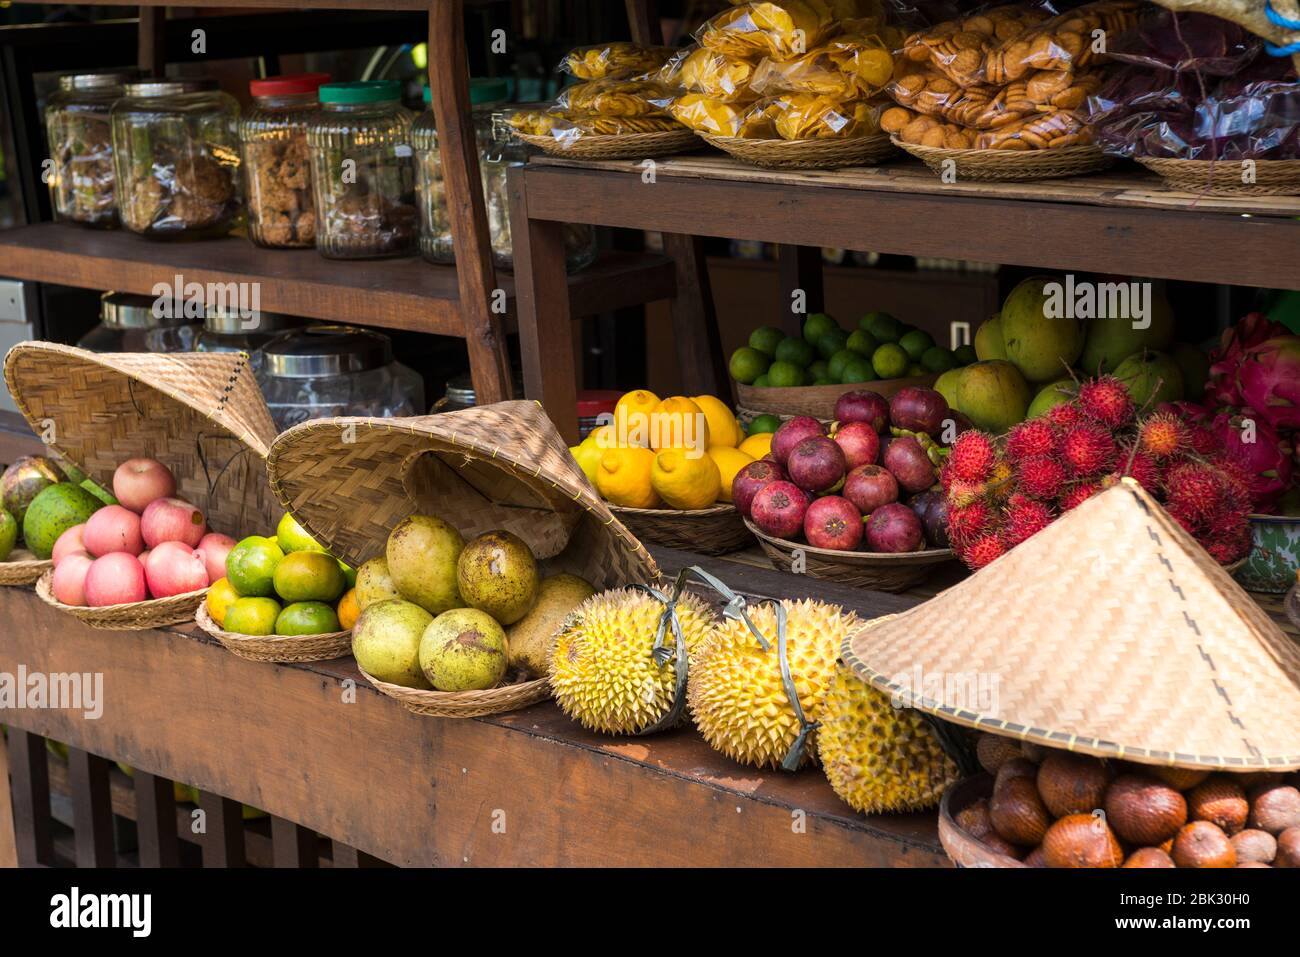 A fruit stall along the road in Ubud, Bali, Indonesia Stock Photo